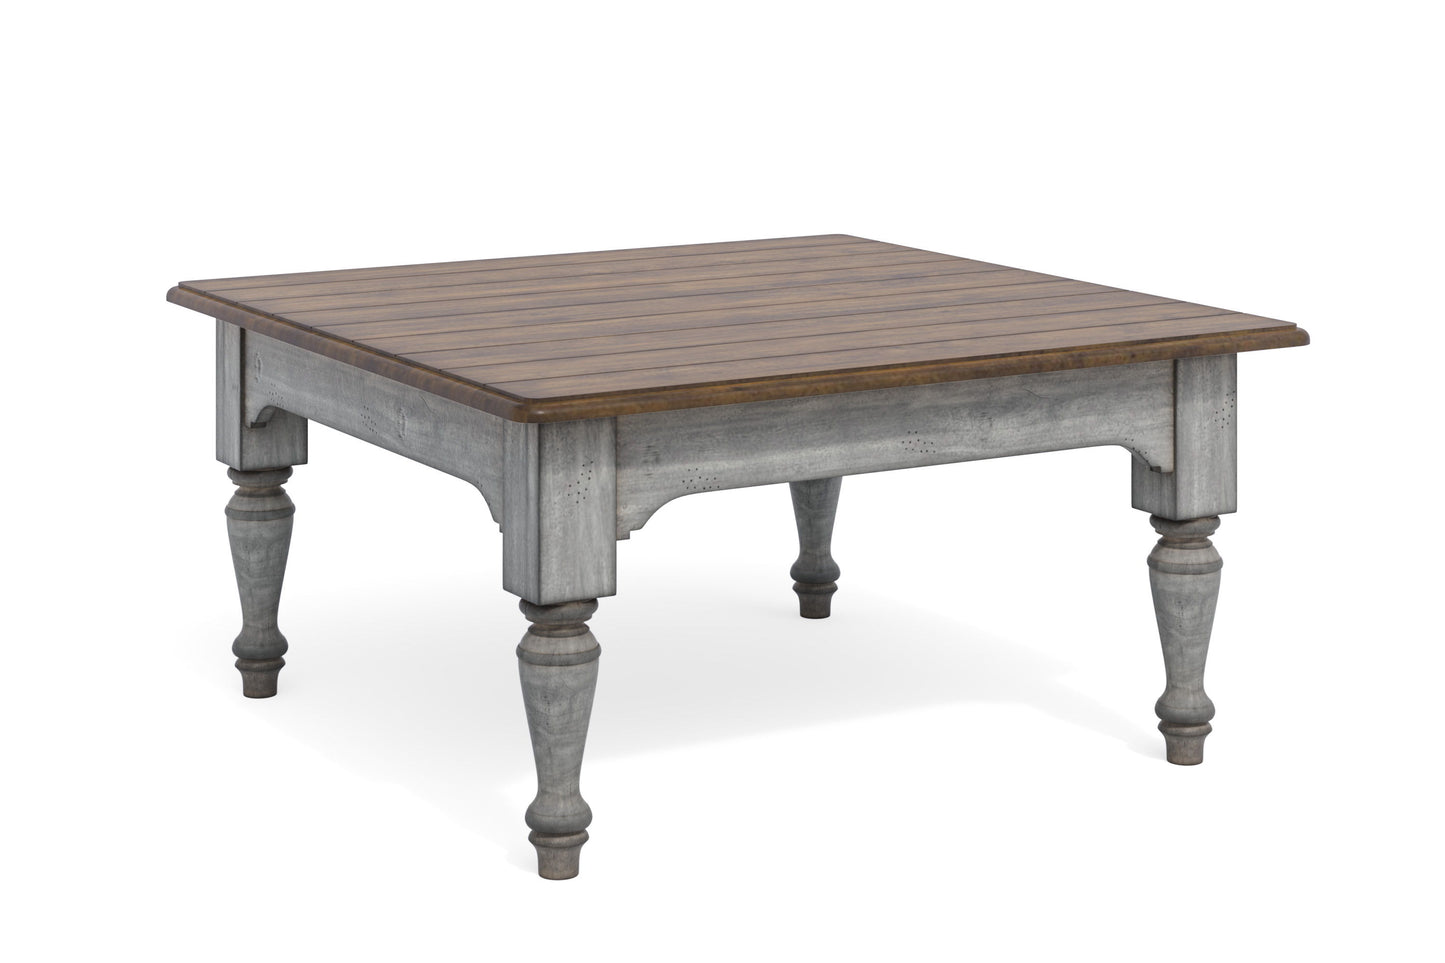 Plymouth - Square Coffee Table